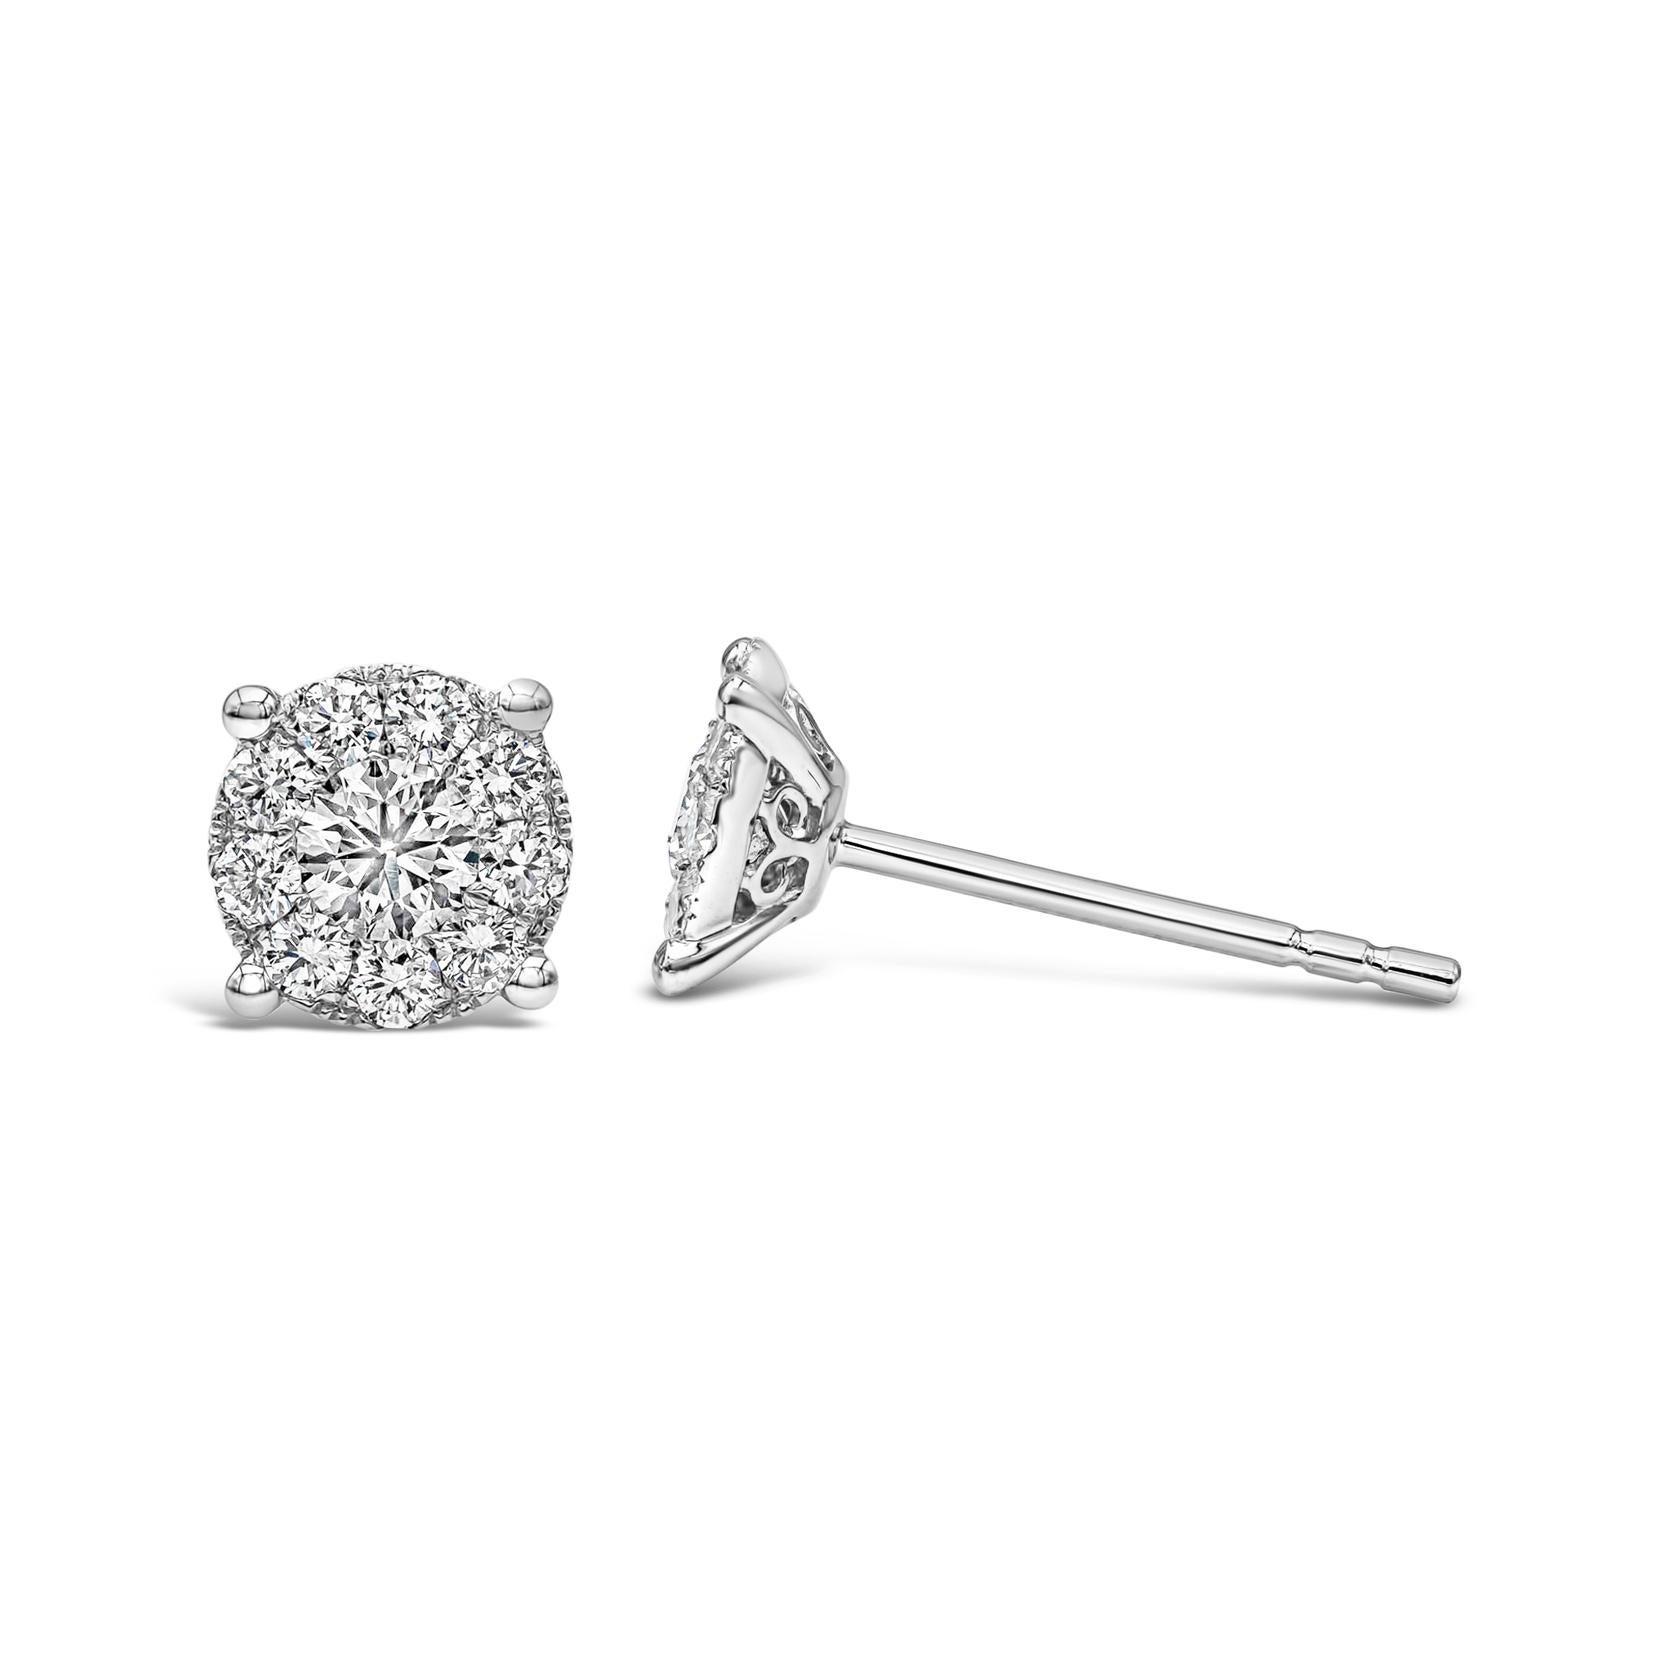 A classic pair of stud earrings showcasing a cluster of round brilliant diamonds weighing 0.93 carats total, F-G Color and VS-SI in Clarity. The earrings exude the look of a one carat each diamond stud earrings. Made with 18K White Gold

Style